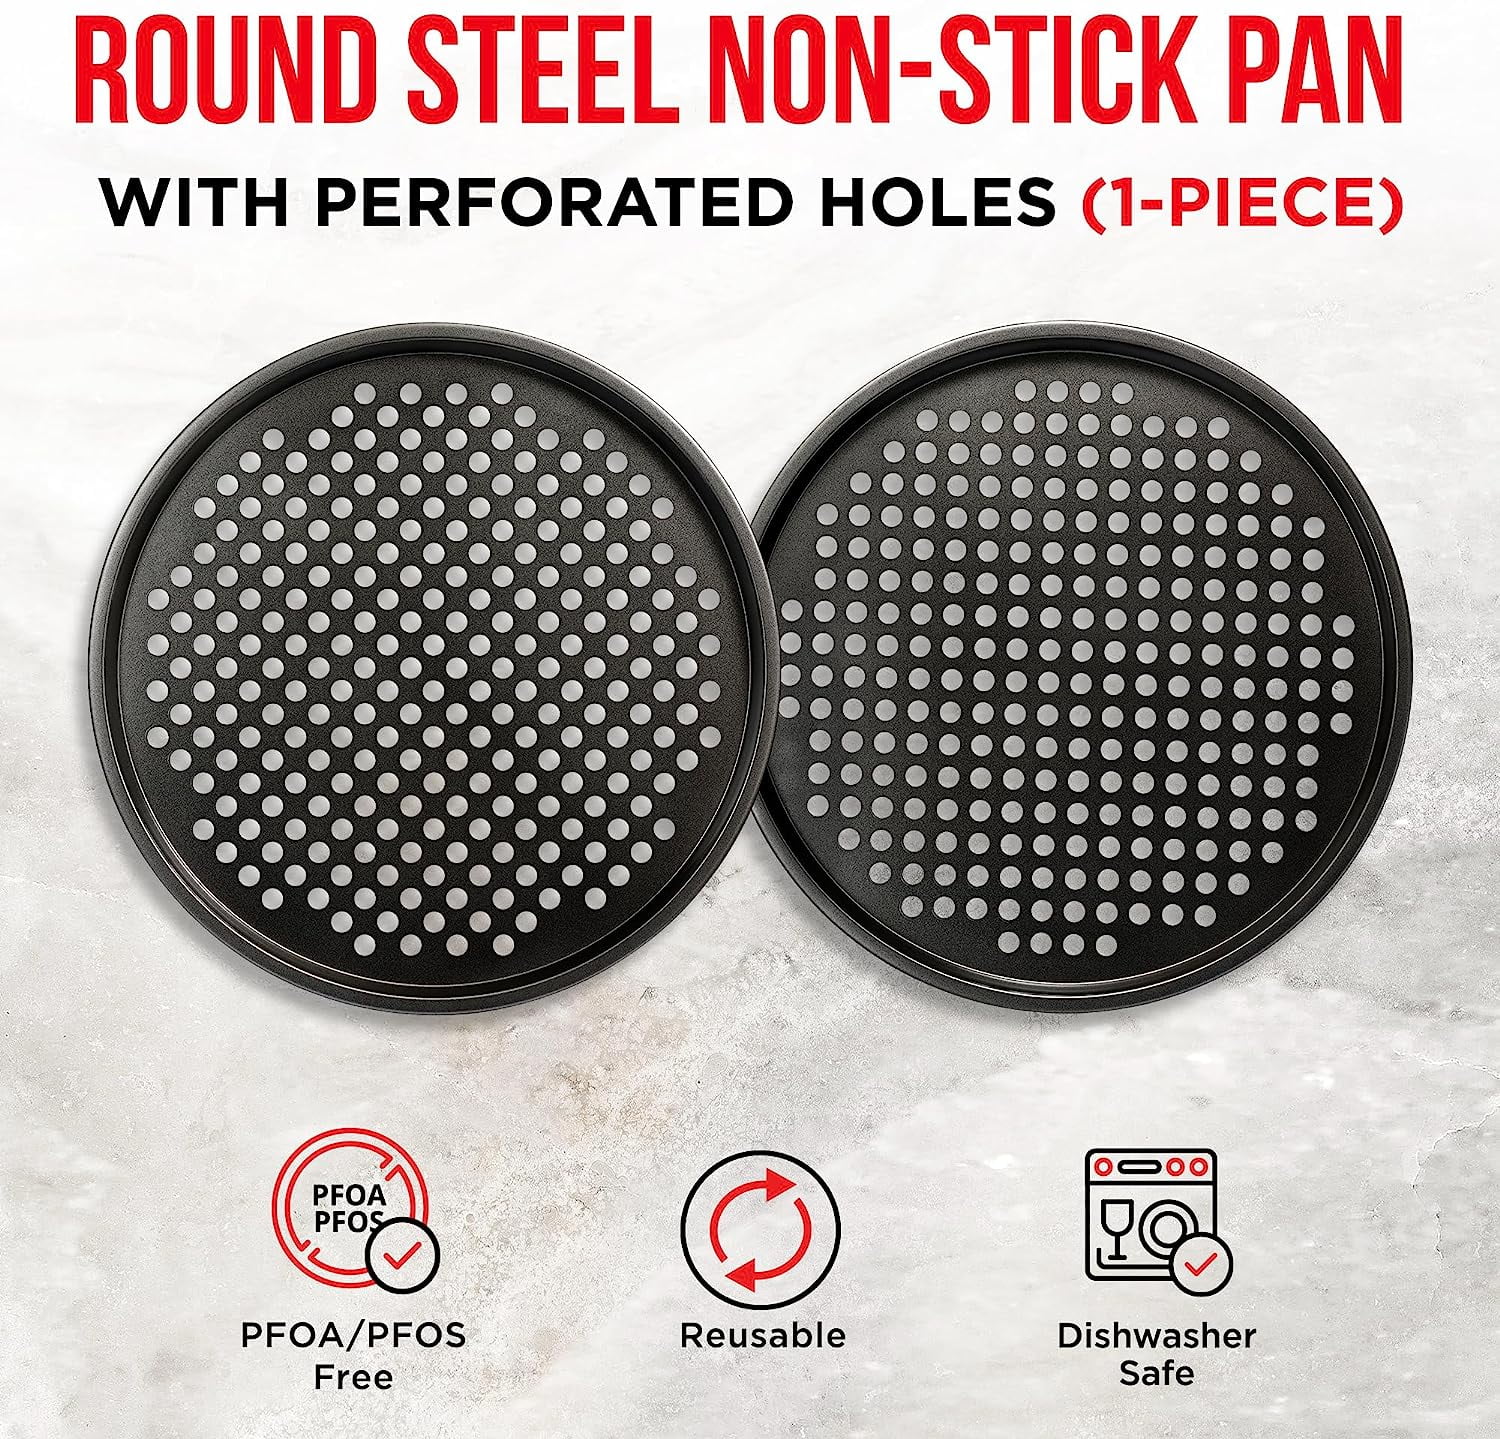 Maxi Small Pizza Pan w/ Holes Non-Stick Scratch Resistant Pizza Pan Set of 2 Made with Steel & Aluminum for Crispy Crust Round Pizza Pan for